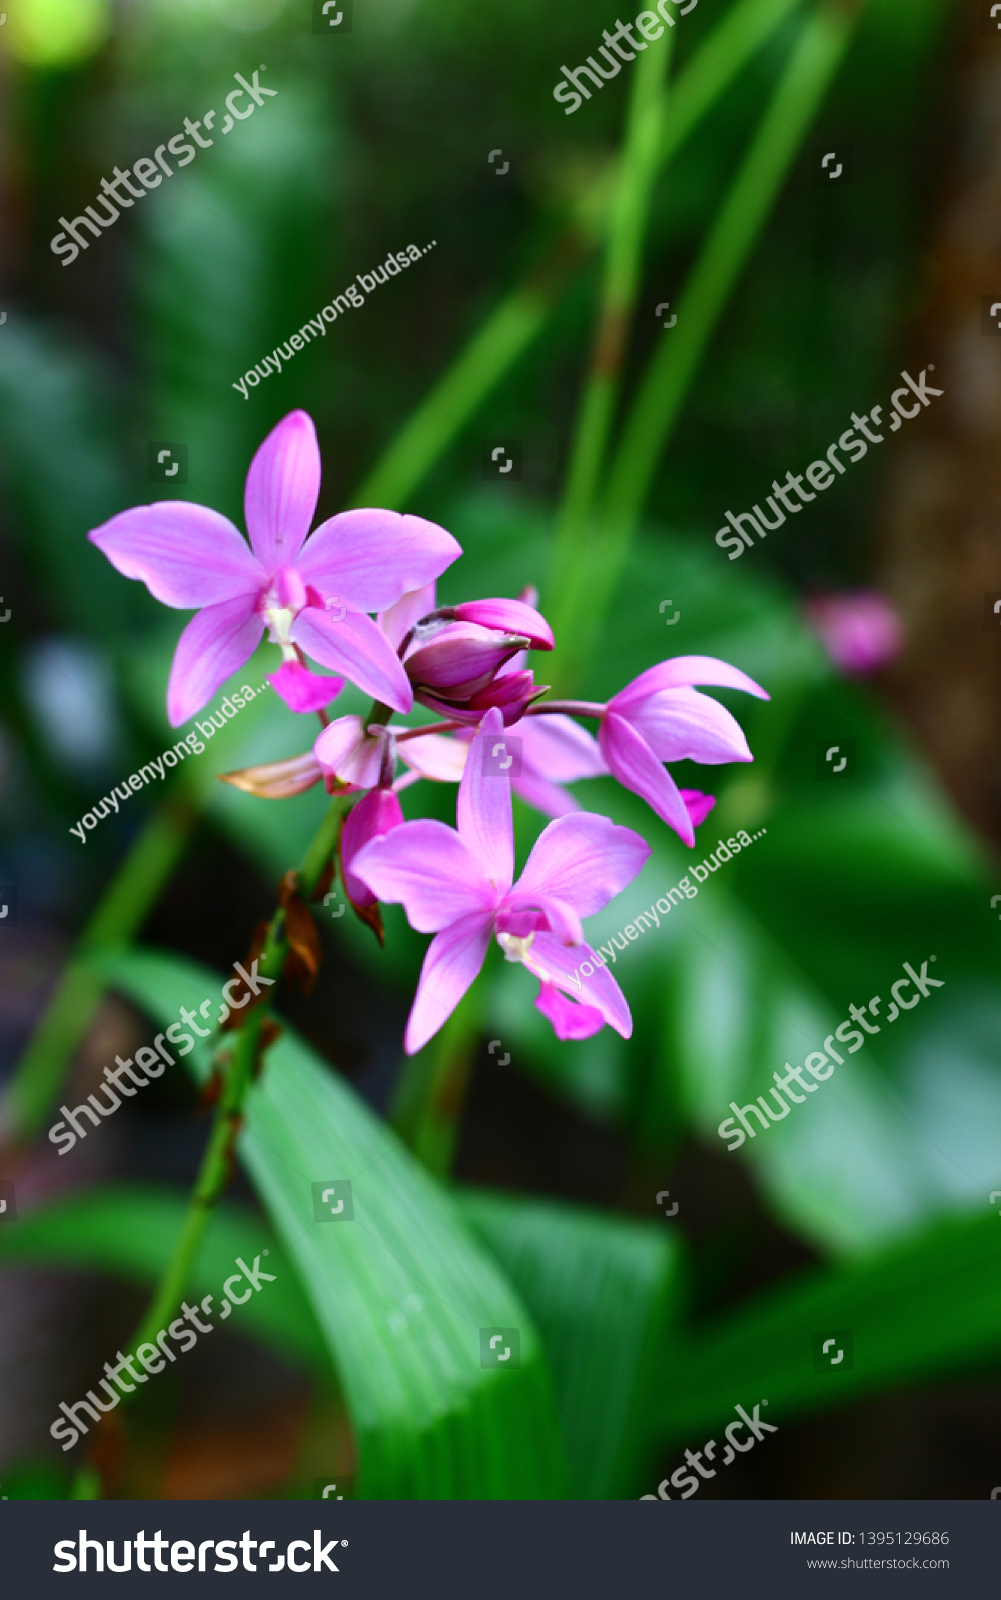 Geodorum The trunk has an oval head or oval-shaped oval shape. With clear articulate lines, flowering pink, blossoming, blooming, bouquet ,in THAILAND. #1395129686